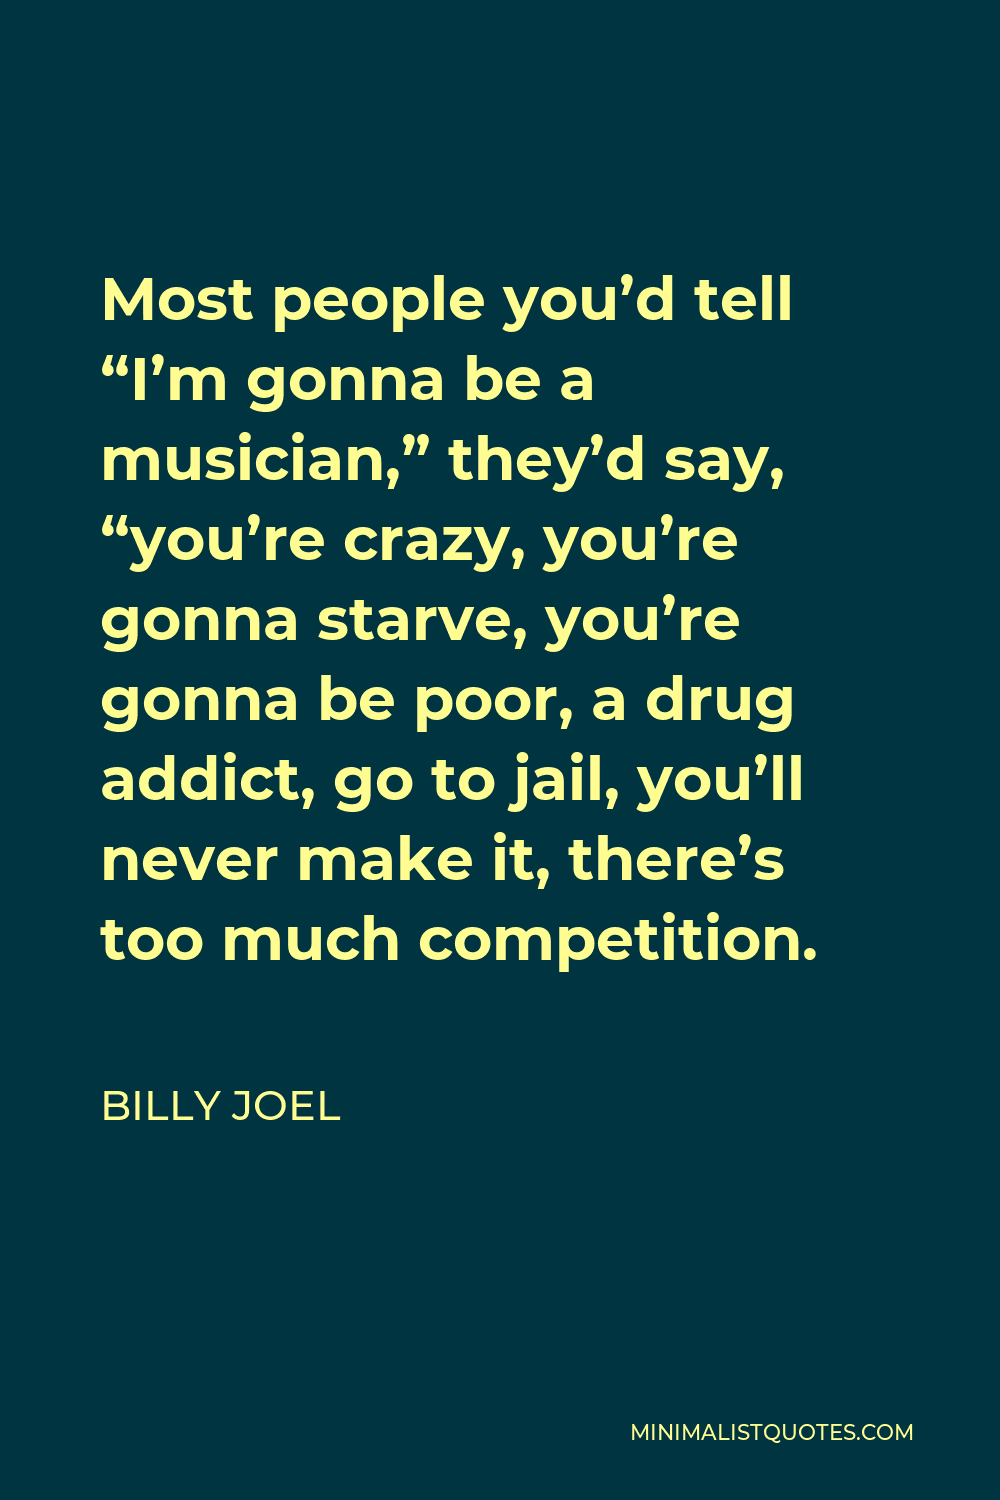 Billy Joel Quote - Most people you’d tell “I’m gonna be a musician,” they’d say, “you’re crazy, you’re gonna starve, you’re gonna be poor, a drug addict, go to jail, you’ll never make it, there’s too much competition.